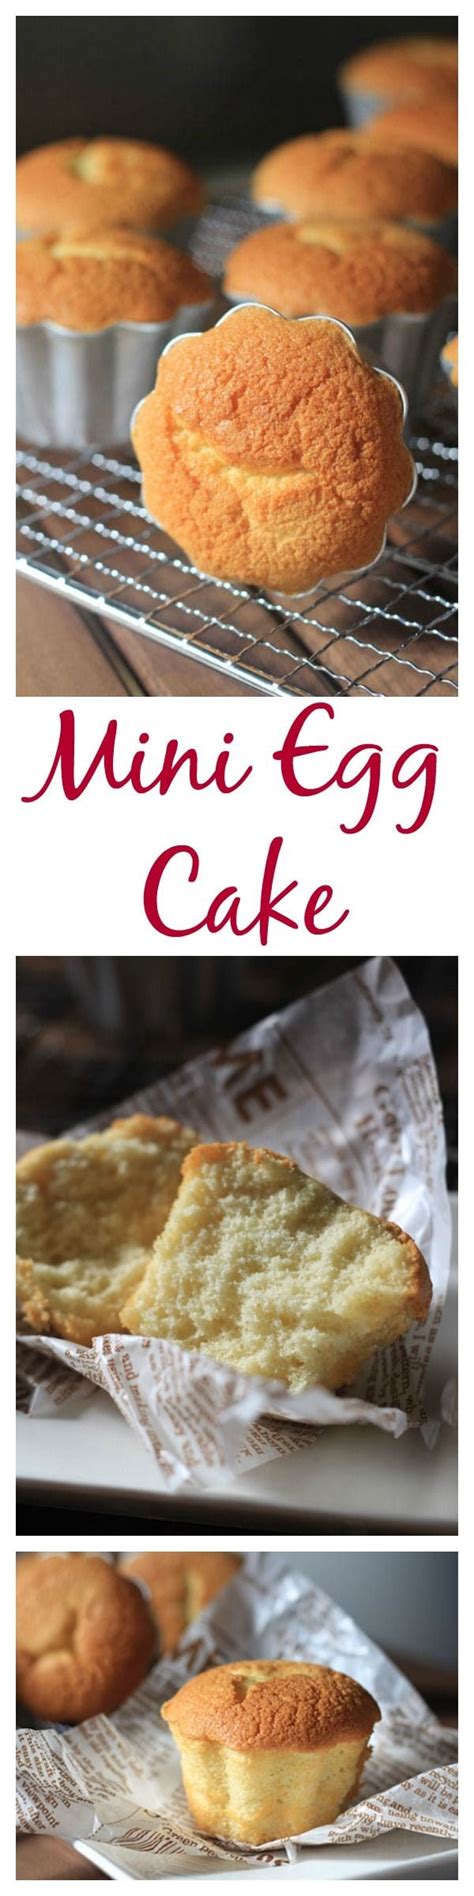 It has a firm, yet well aerated structure, similar to a sea sponge. Mini Egg Cake (Chinese Sponge Cake) - Rasa Malaysia